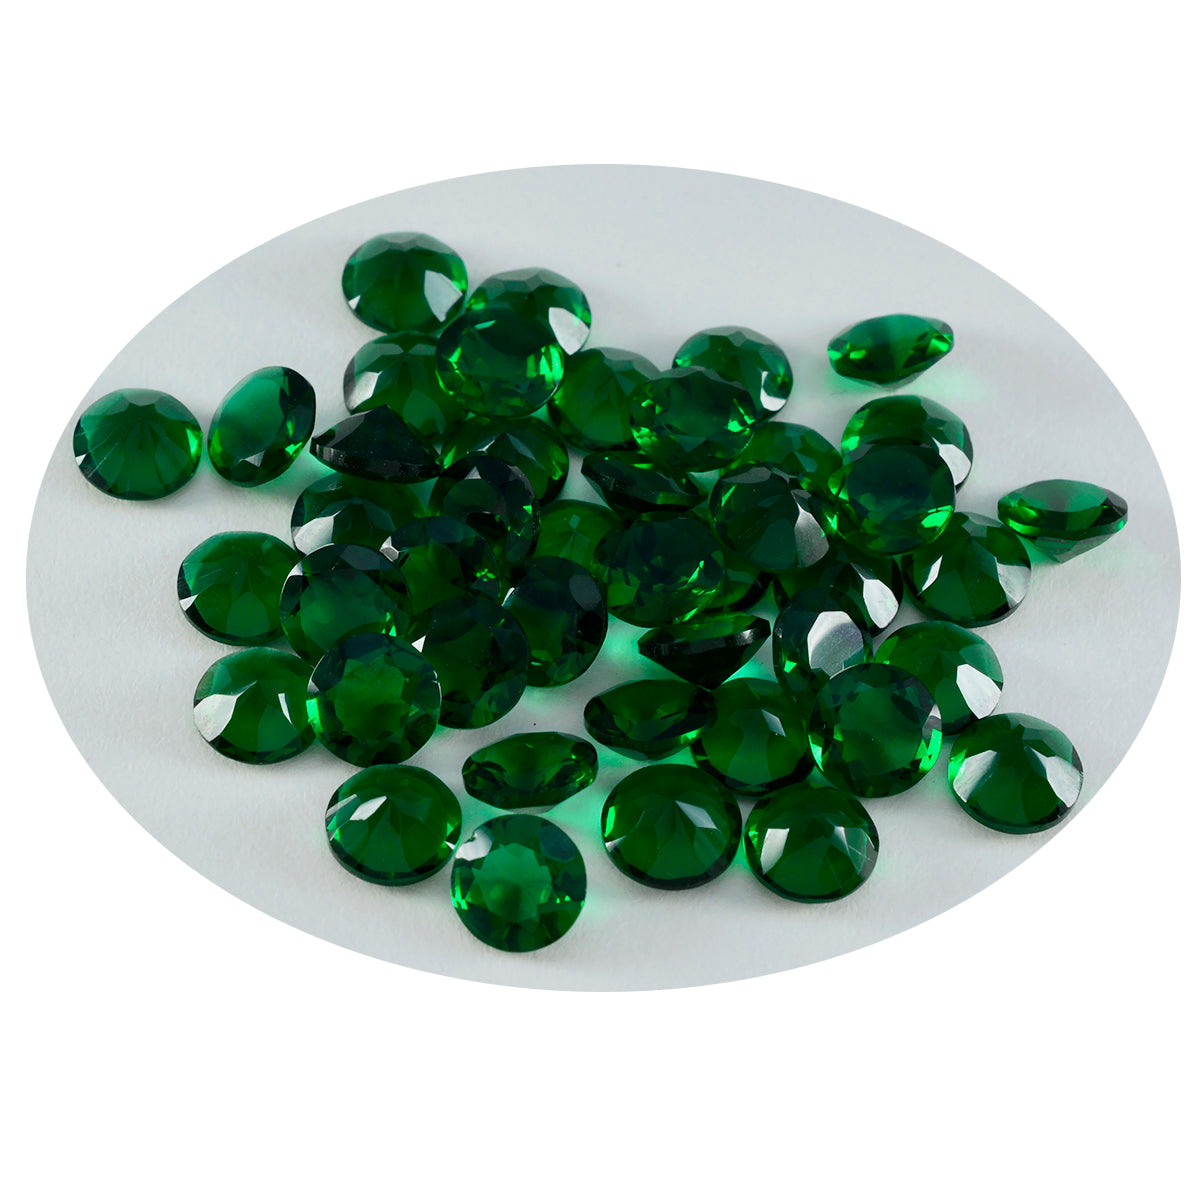 Riyogems 1PC Green Emerald CZ Faceted 2x2 mm Round Shape awesome Quality Loose Stone